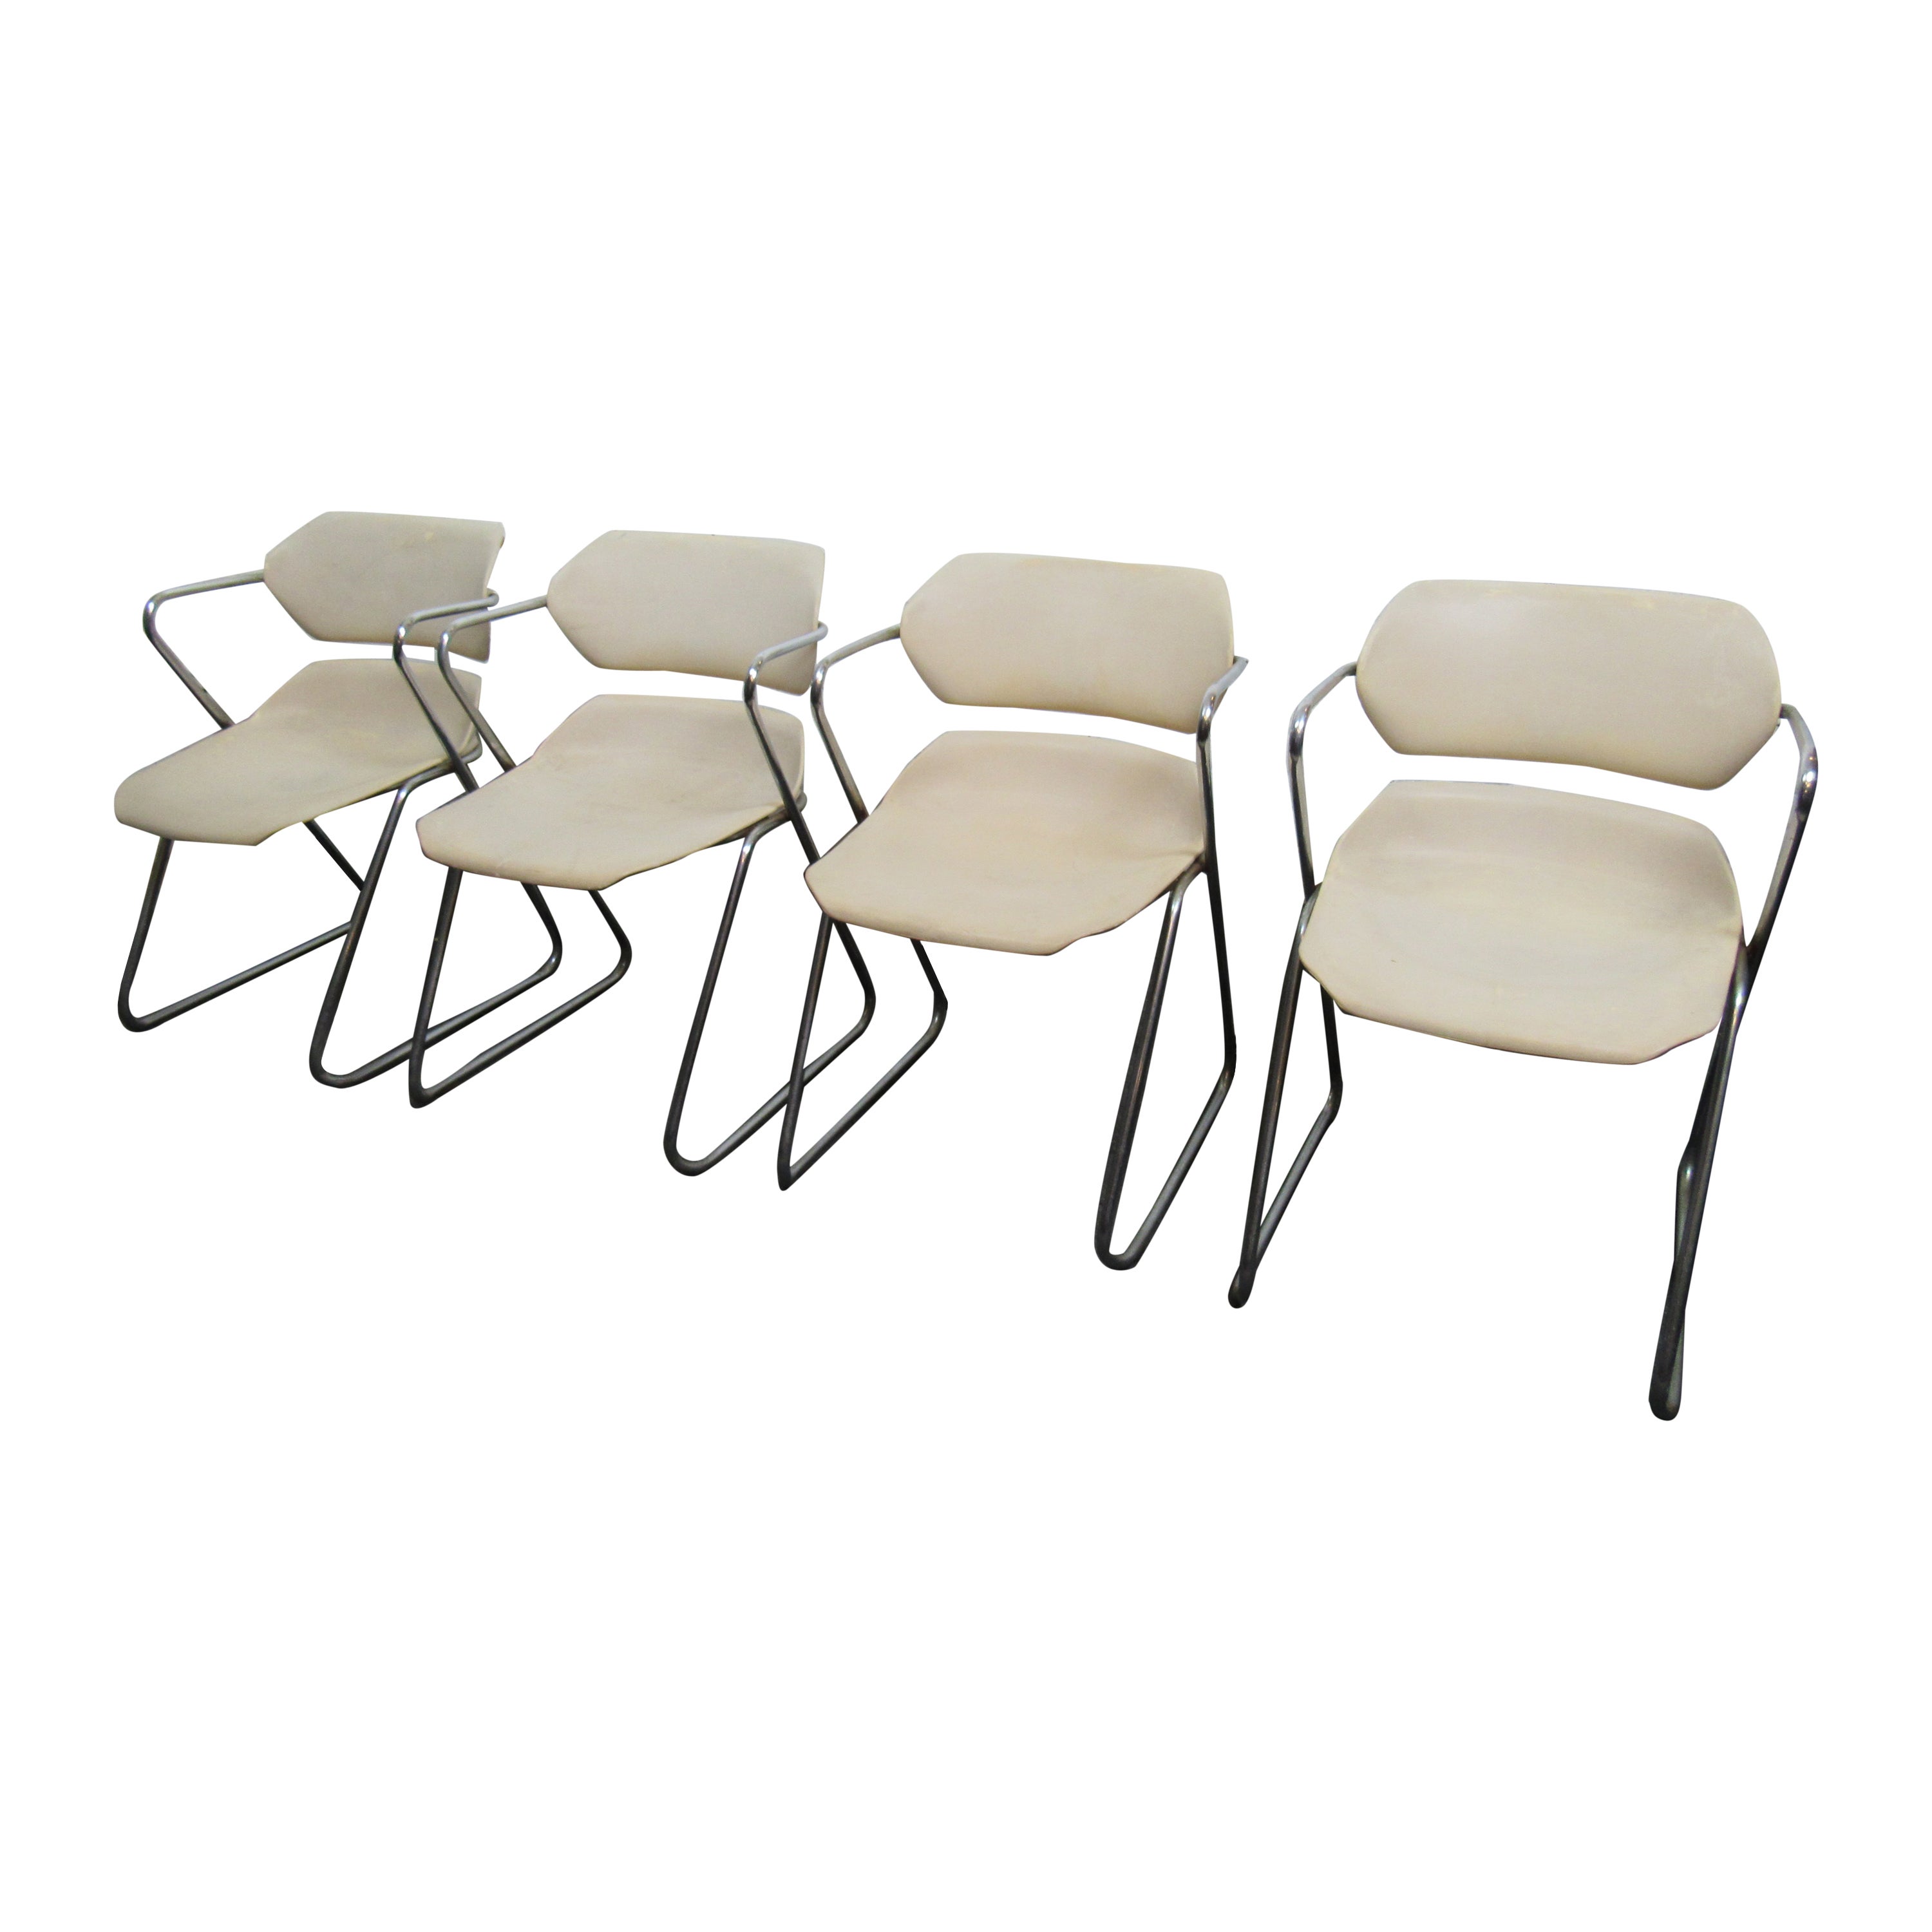 Set of Four White 'Acton Stacker' Chairs by American Seating For Sale